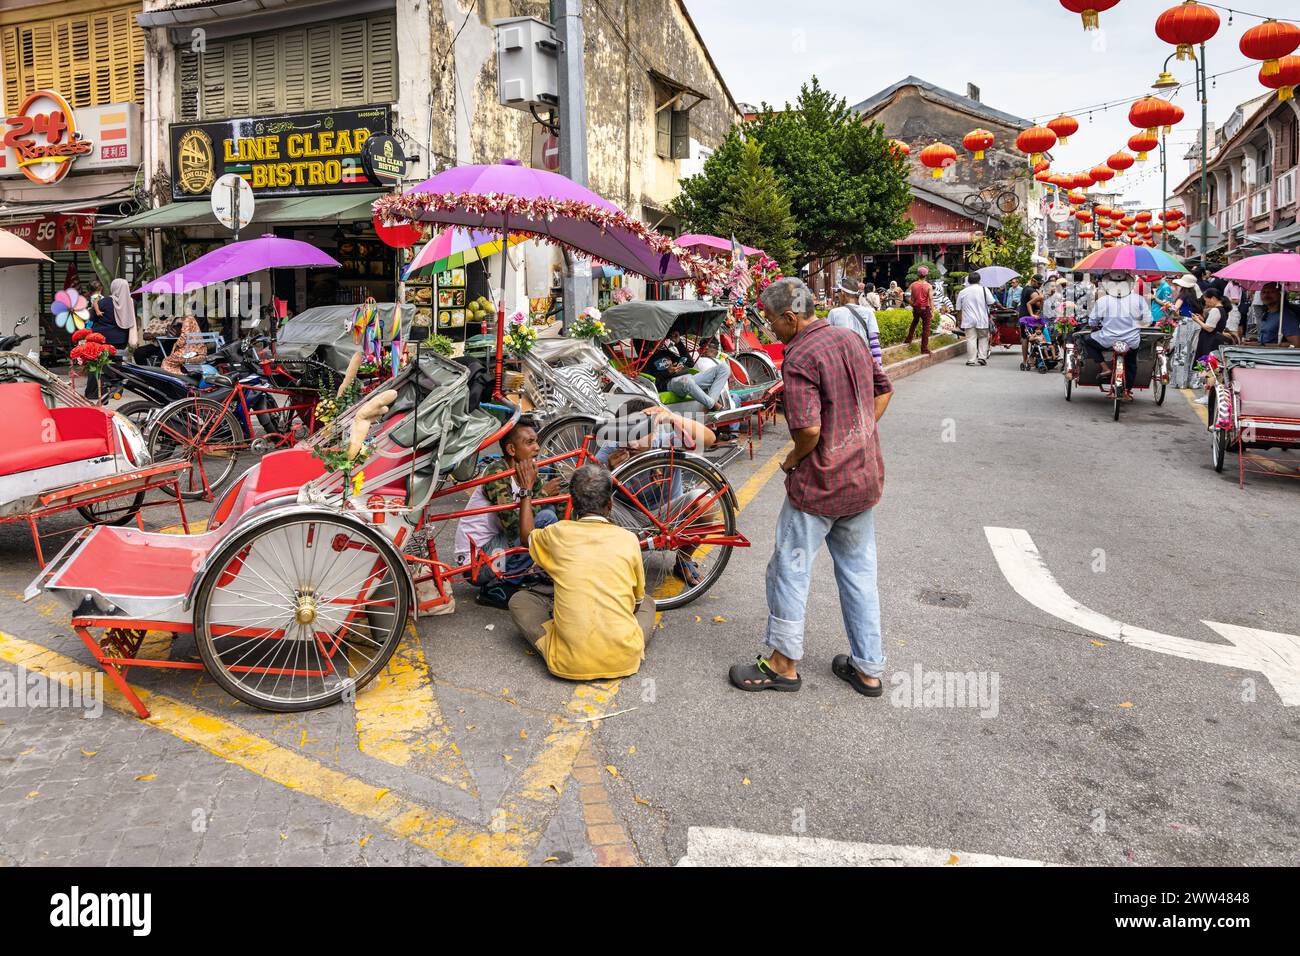 carrying out repairs to Trishaws, or cycle rikshaws, in Georgetown, Penang, Malaysia Stock Photo